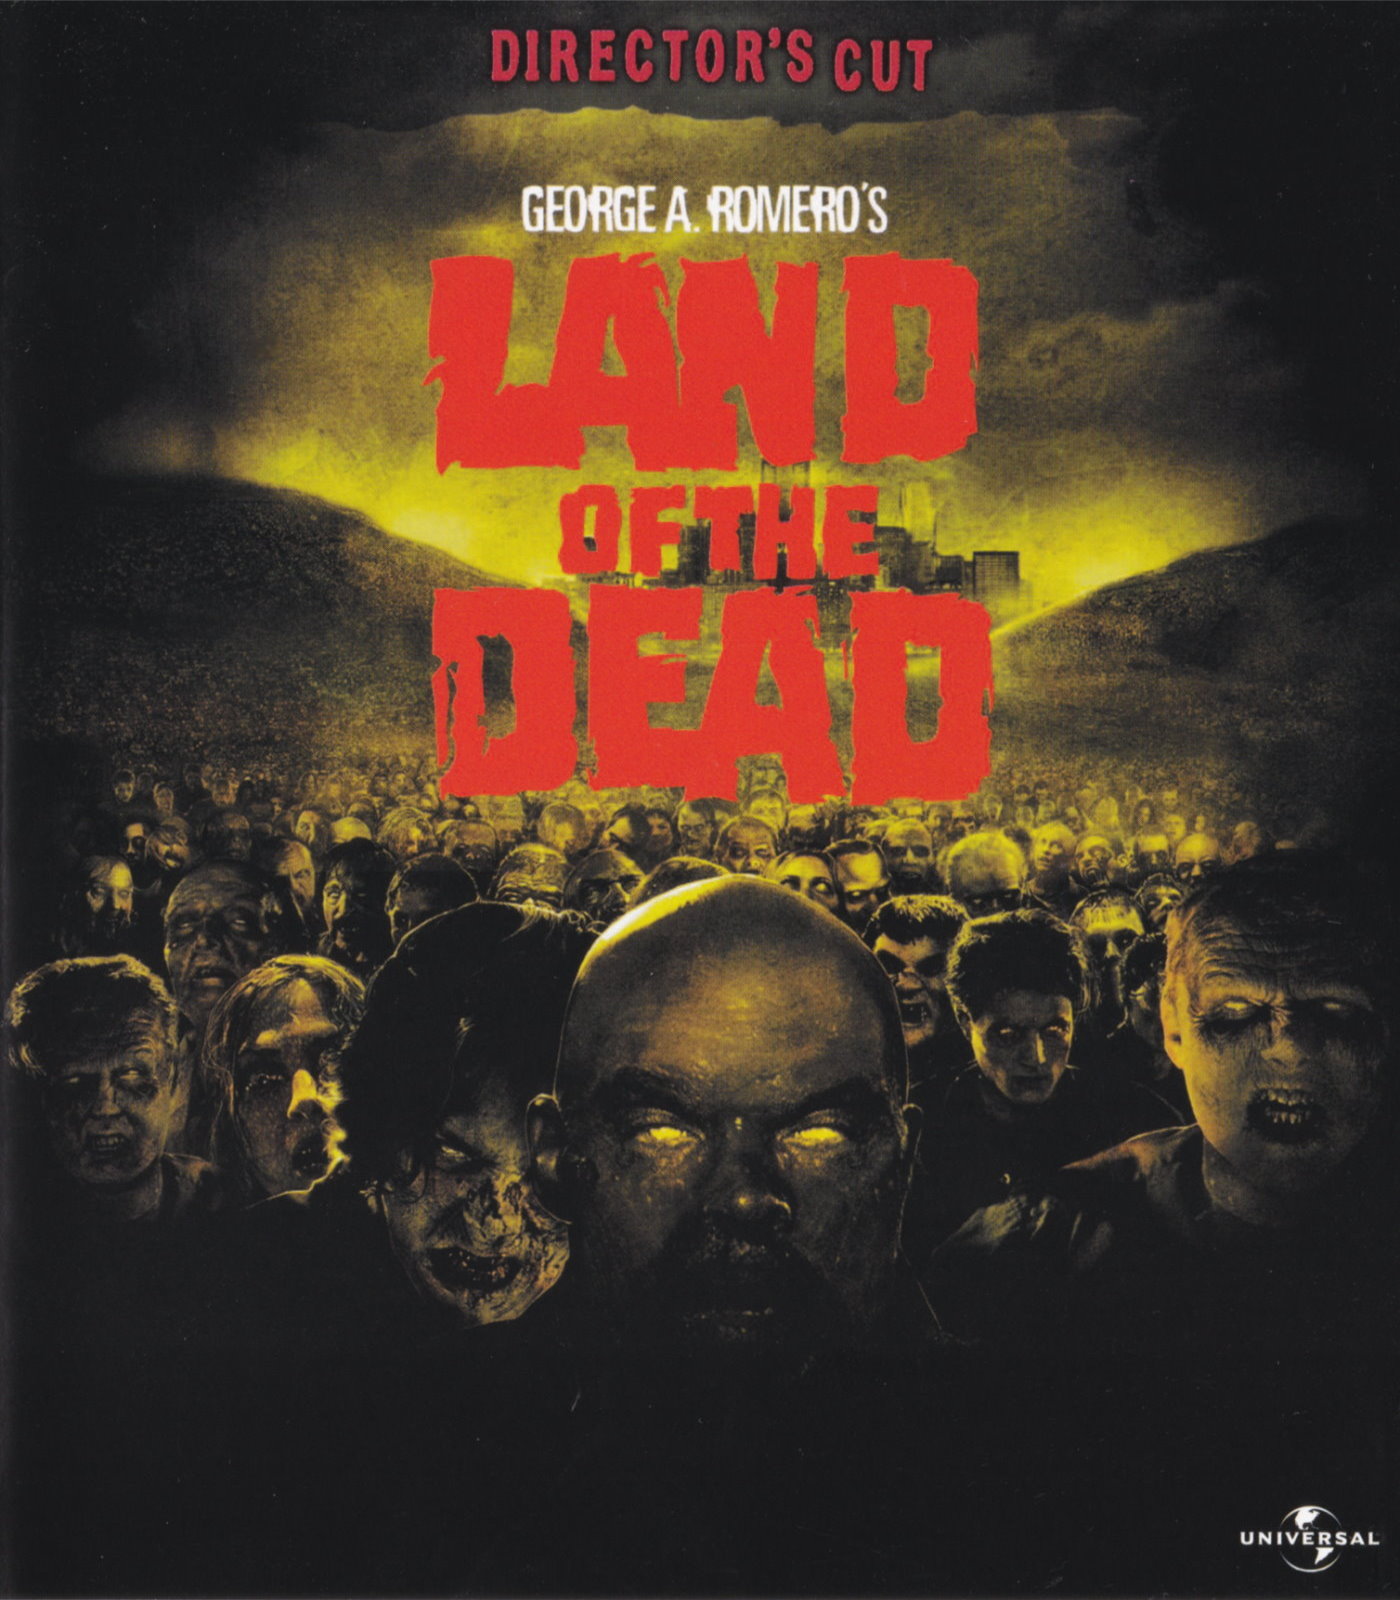 Cover - Land of the Dead.jpg